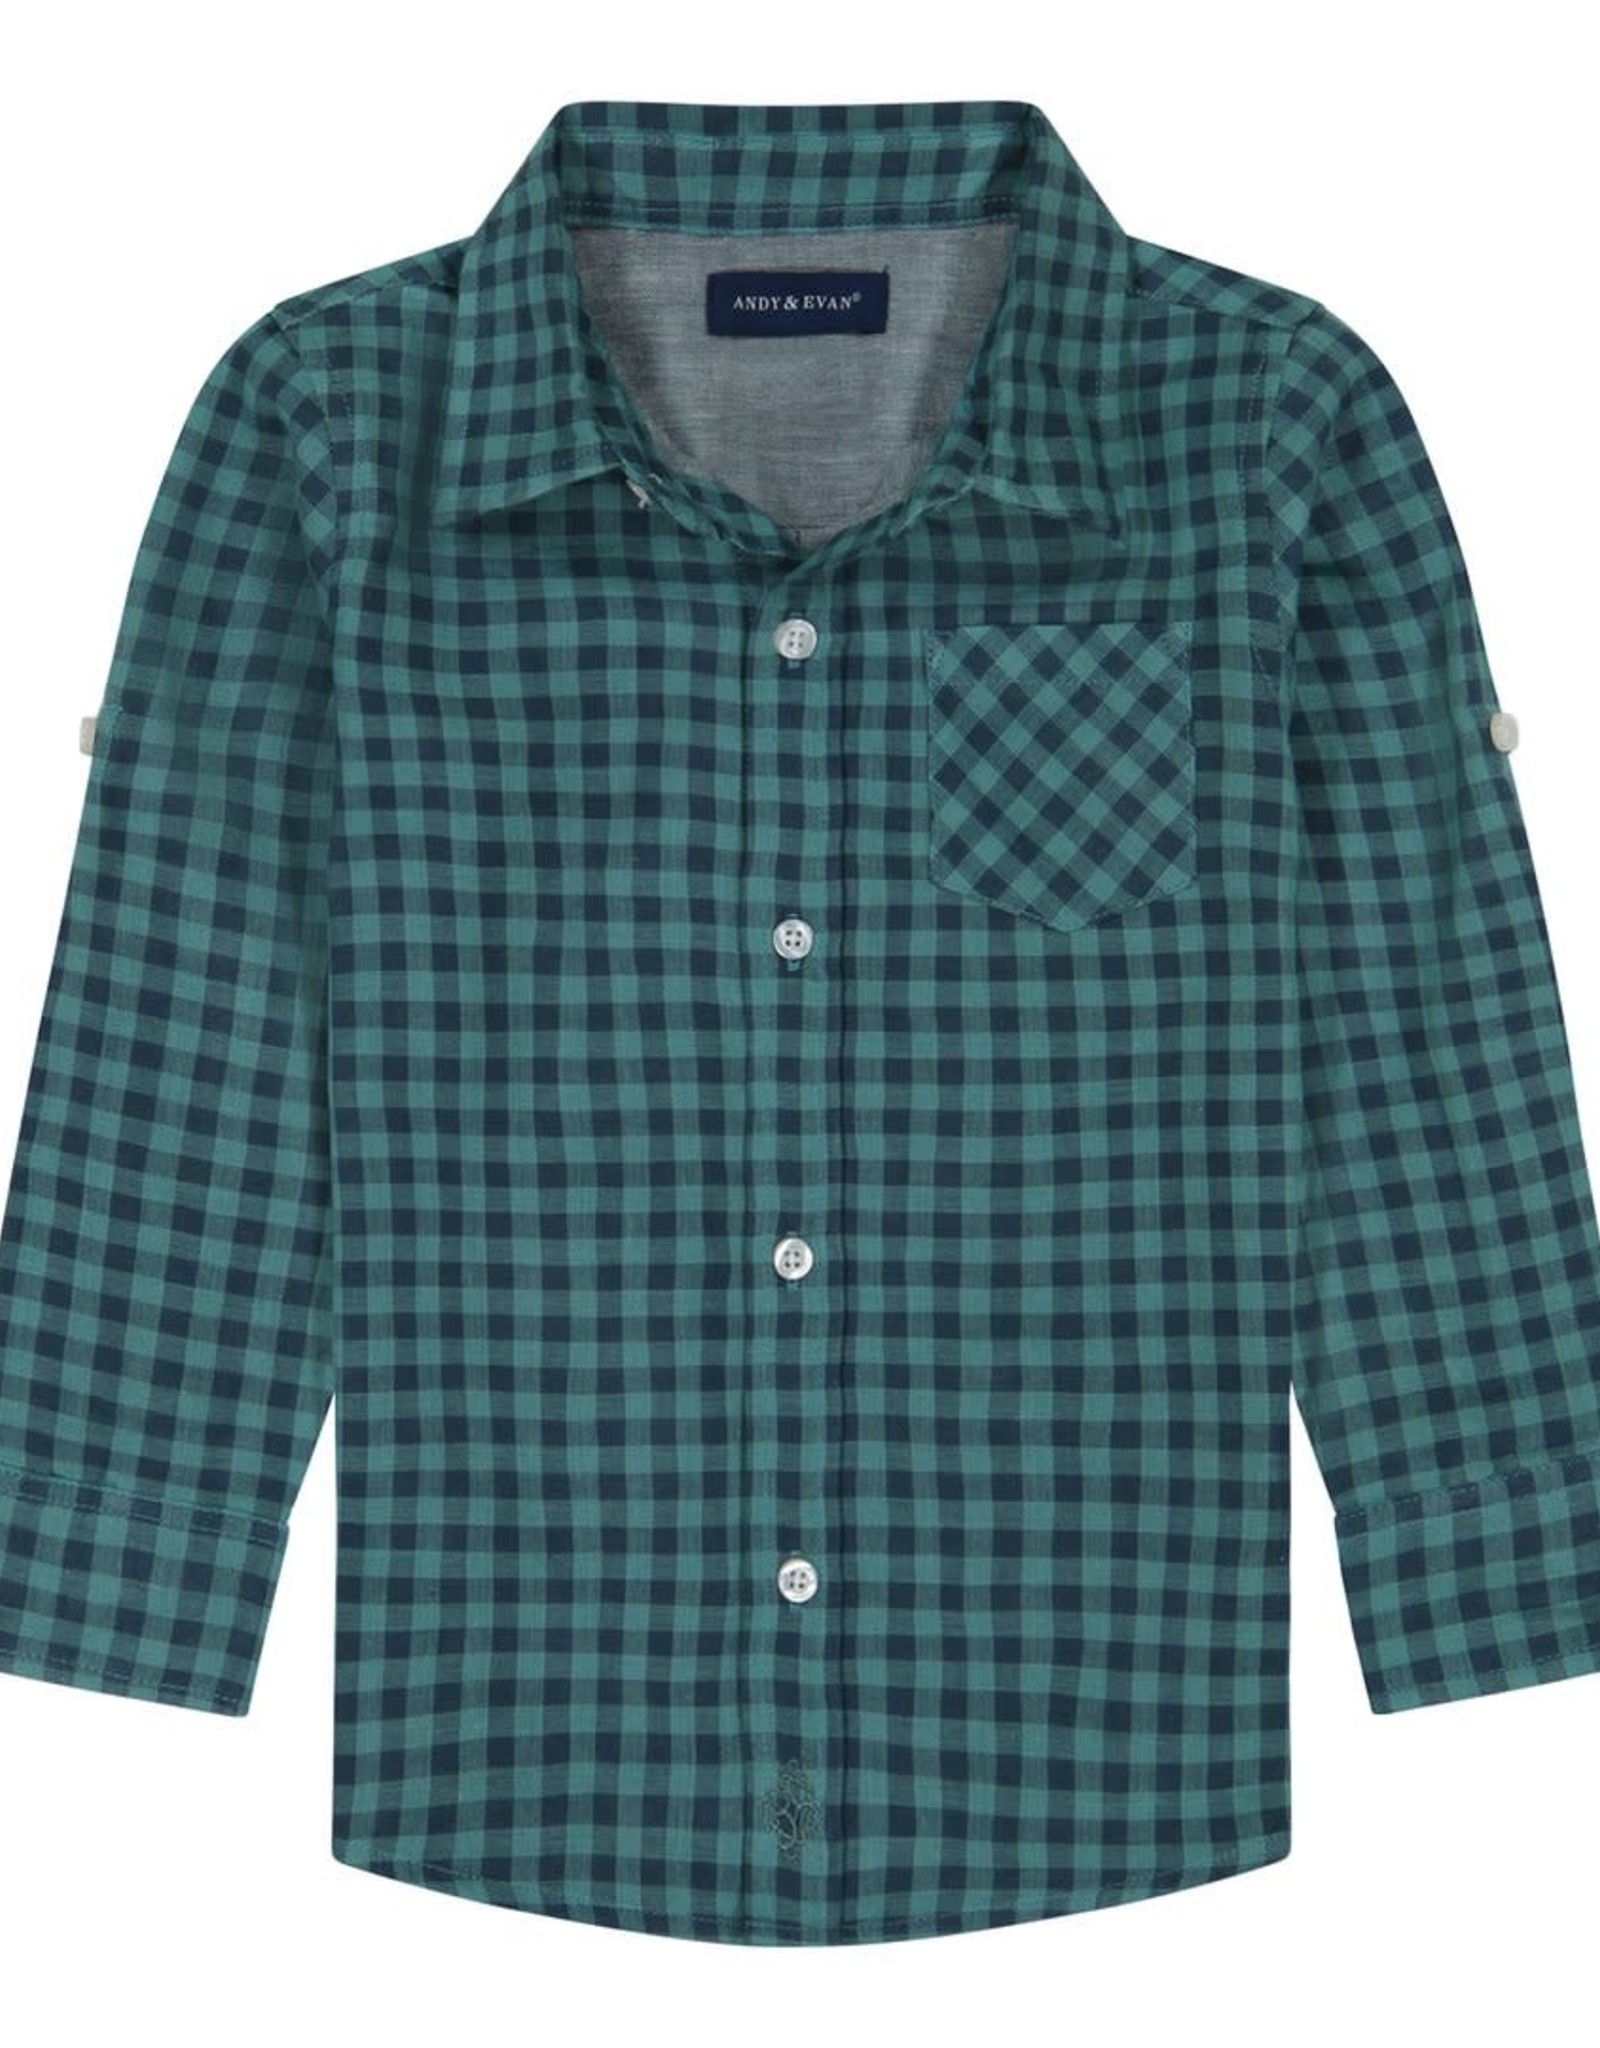 Andy & Evan Green and Blue Checked Button Down Shirt